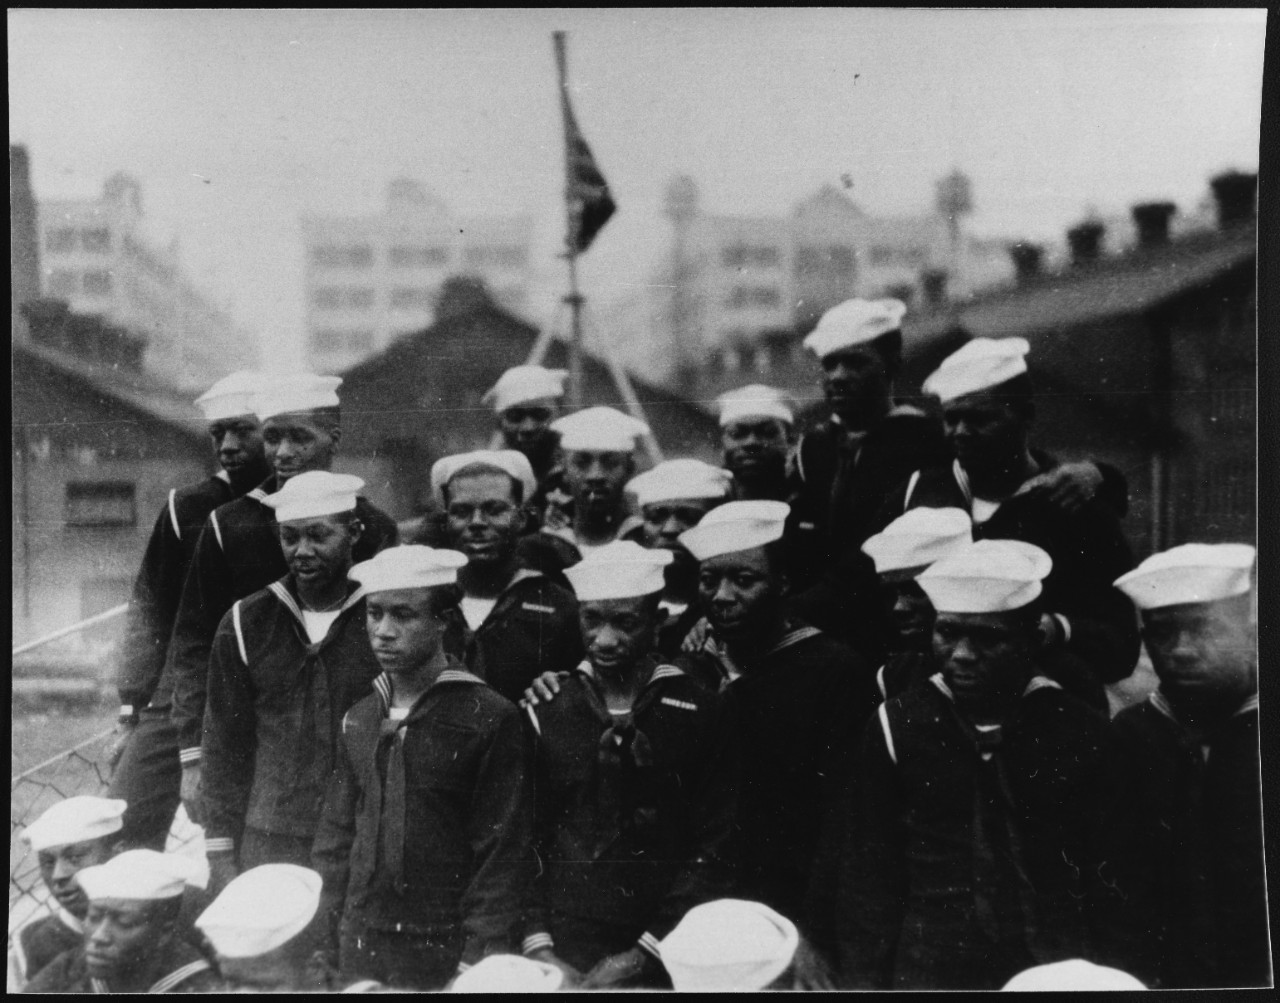 Mason’s crew mustered in their Dress Blues on the ship's bow while moored at New York Harbor, New York. (Naval History and Heritage Command Photograph NH 106729)